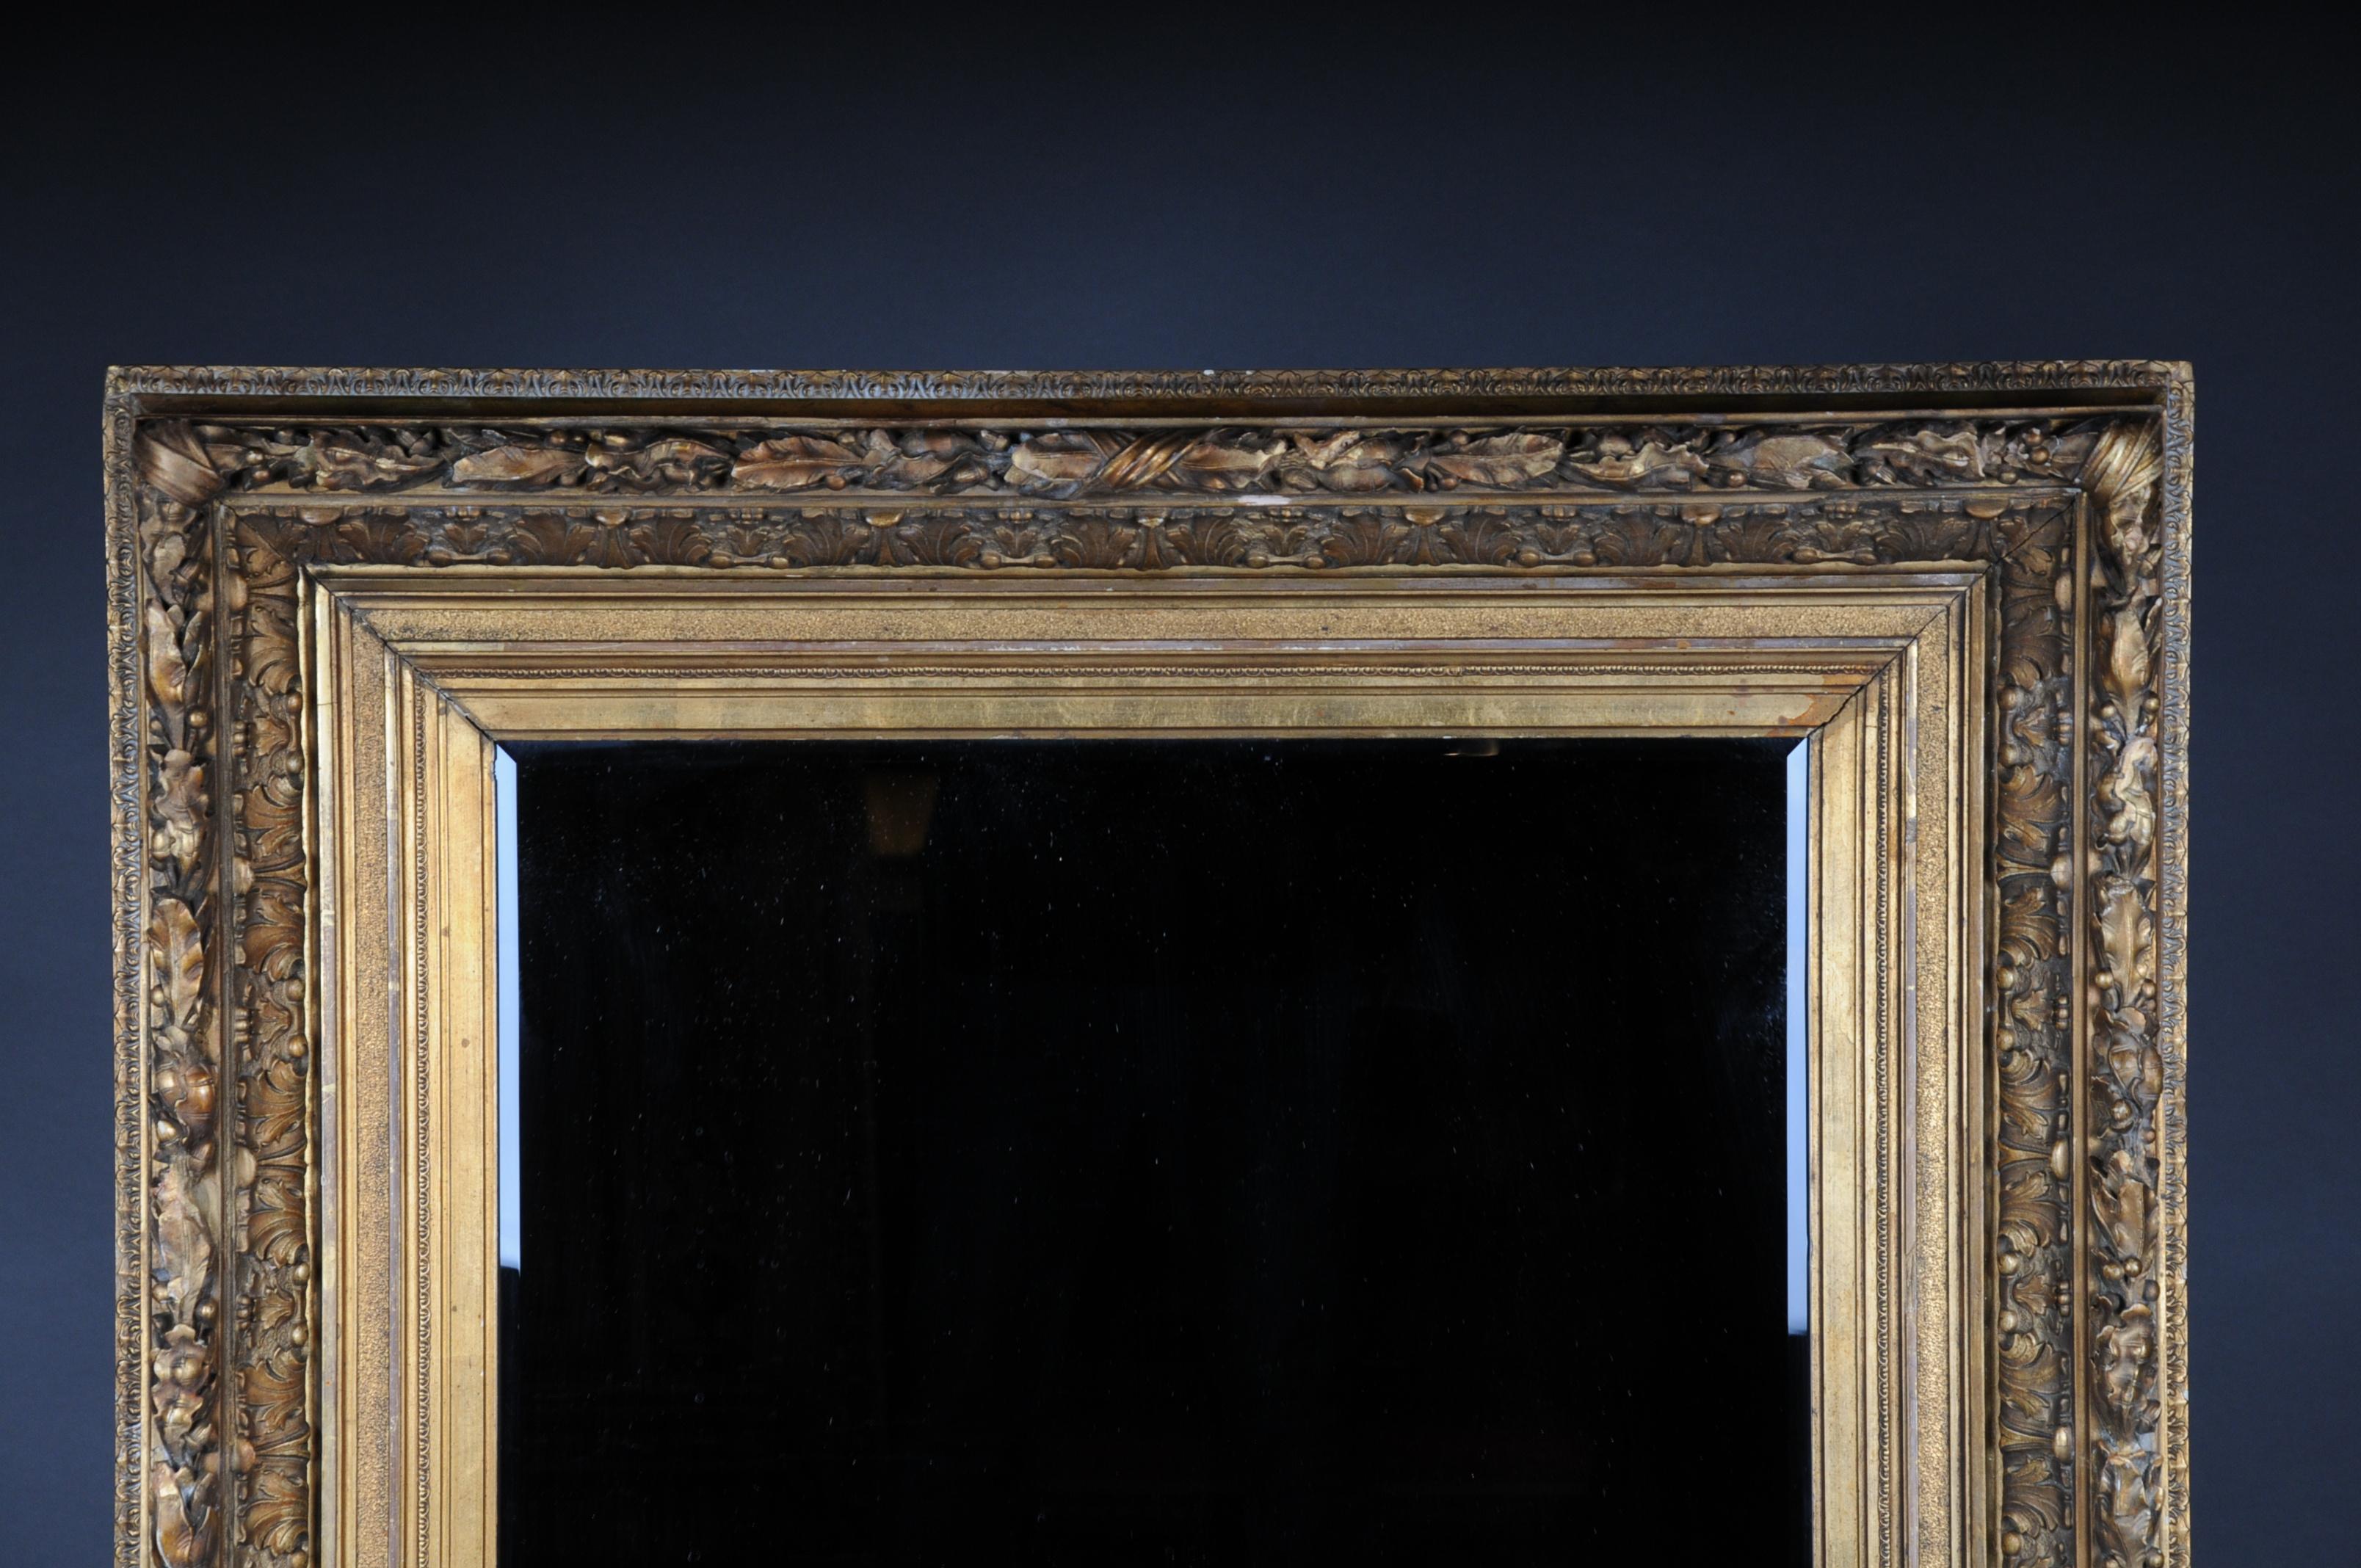 Napoleon III 19th Century Ornate Wall Mirror Gold Frame, Gilded, circa 1870 For Sale